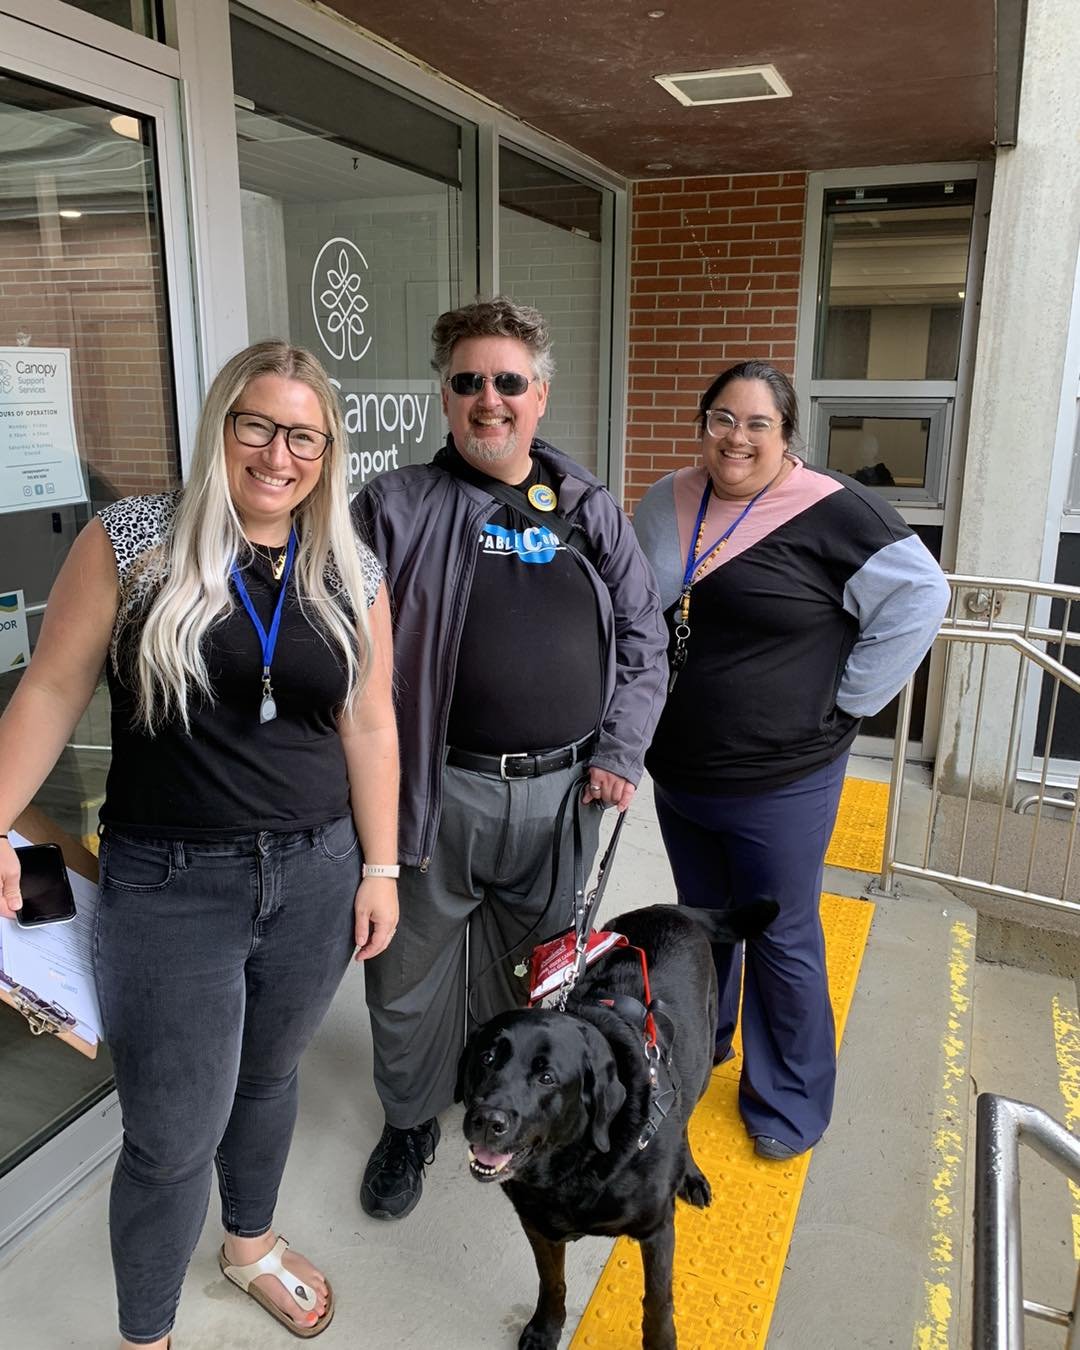 Canopy was thrilled to have Jason and his team from Council for Persons with Disabilities at our O&rsquo;Carroll office yesterday! They provided our teams with an engaging and informative &ldquo;In My Shoes&rdquo; training that helped us all better u